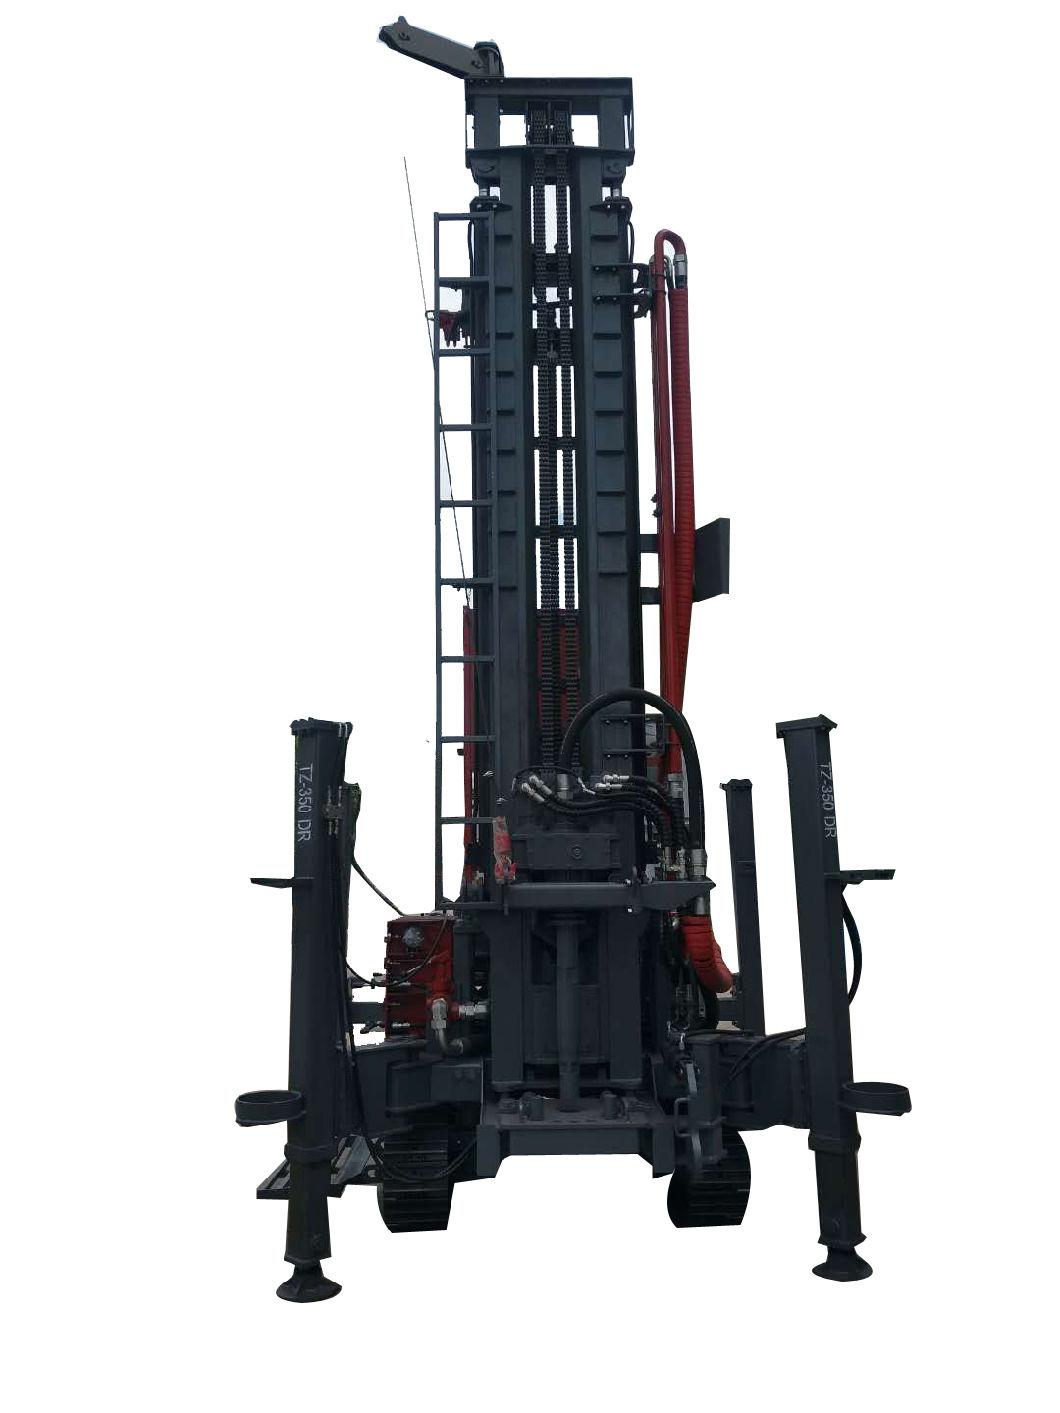 Borehole 450m Deep Water Well Drilling Rig